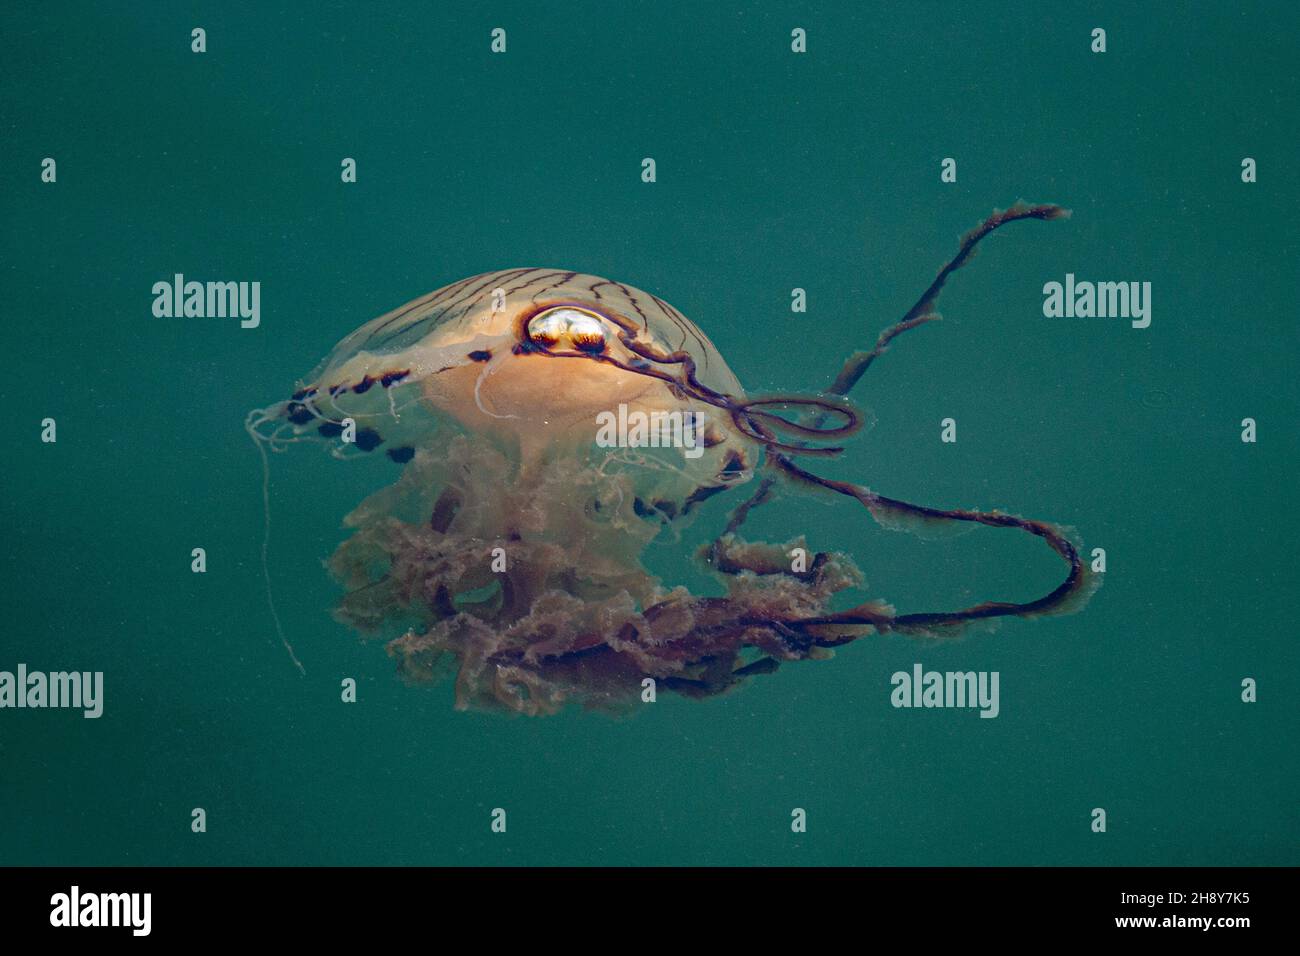 A Compass Jellyfish (Chrysaora Hysoscella) pictured in Mevagissey Harbour on a hot July day - Mevagissey, Cornwall, UK. Stock Photo